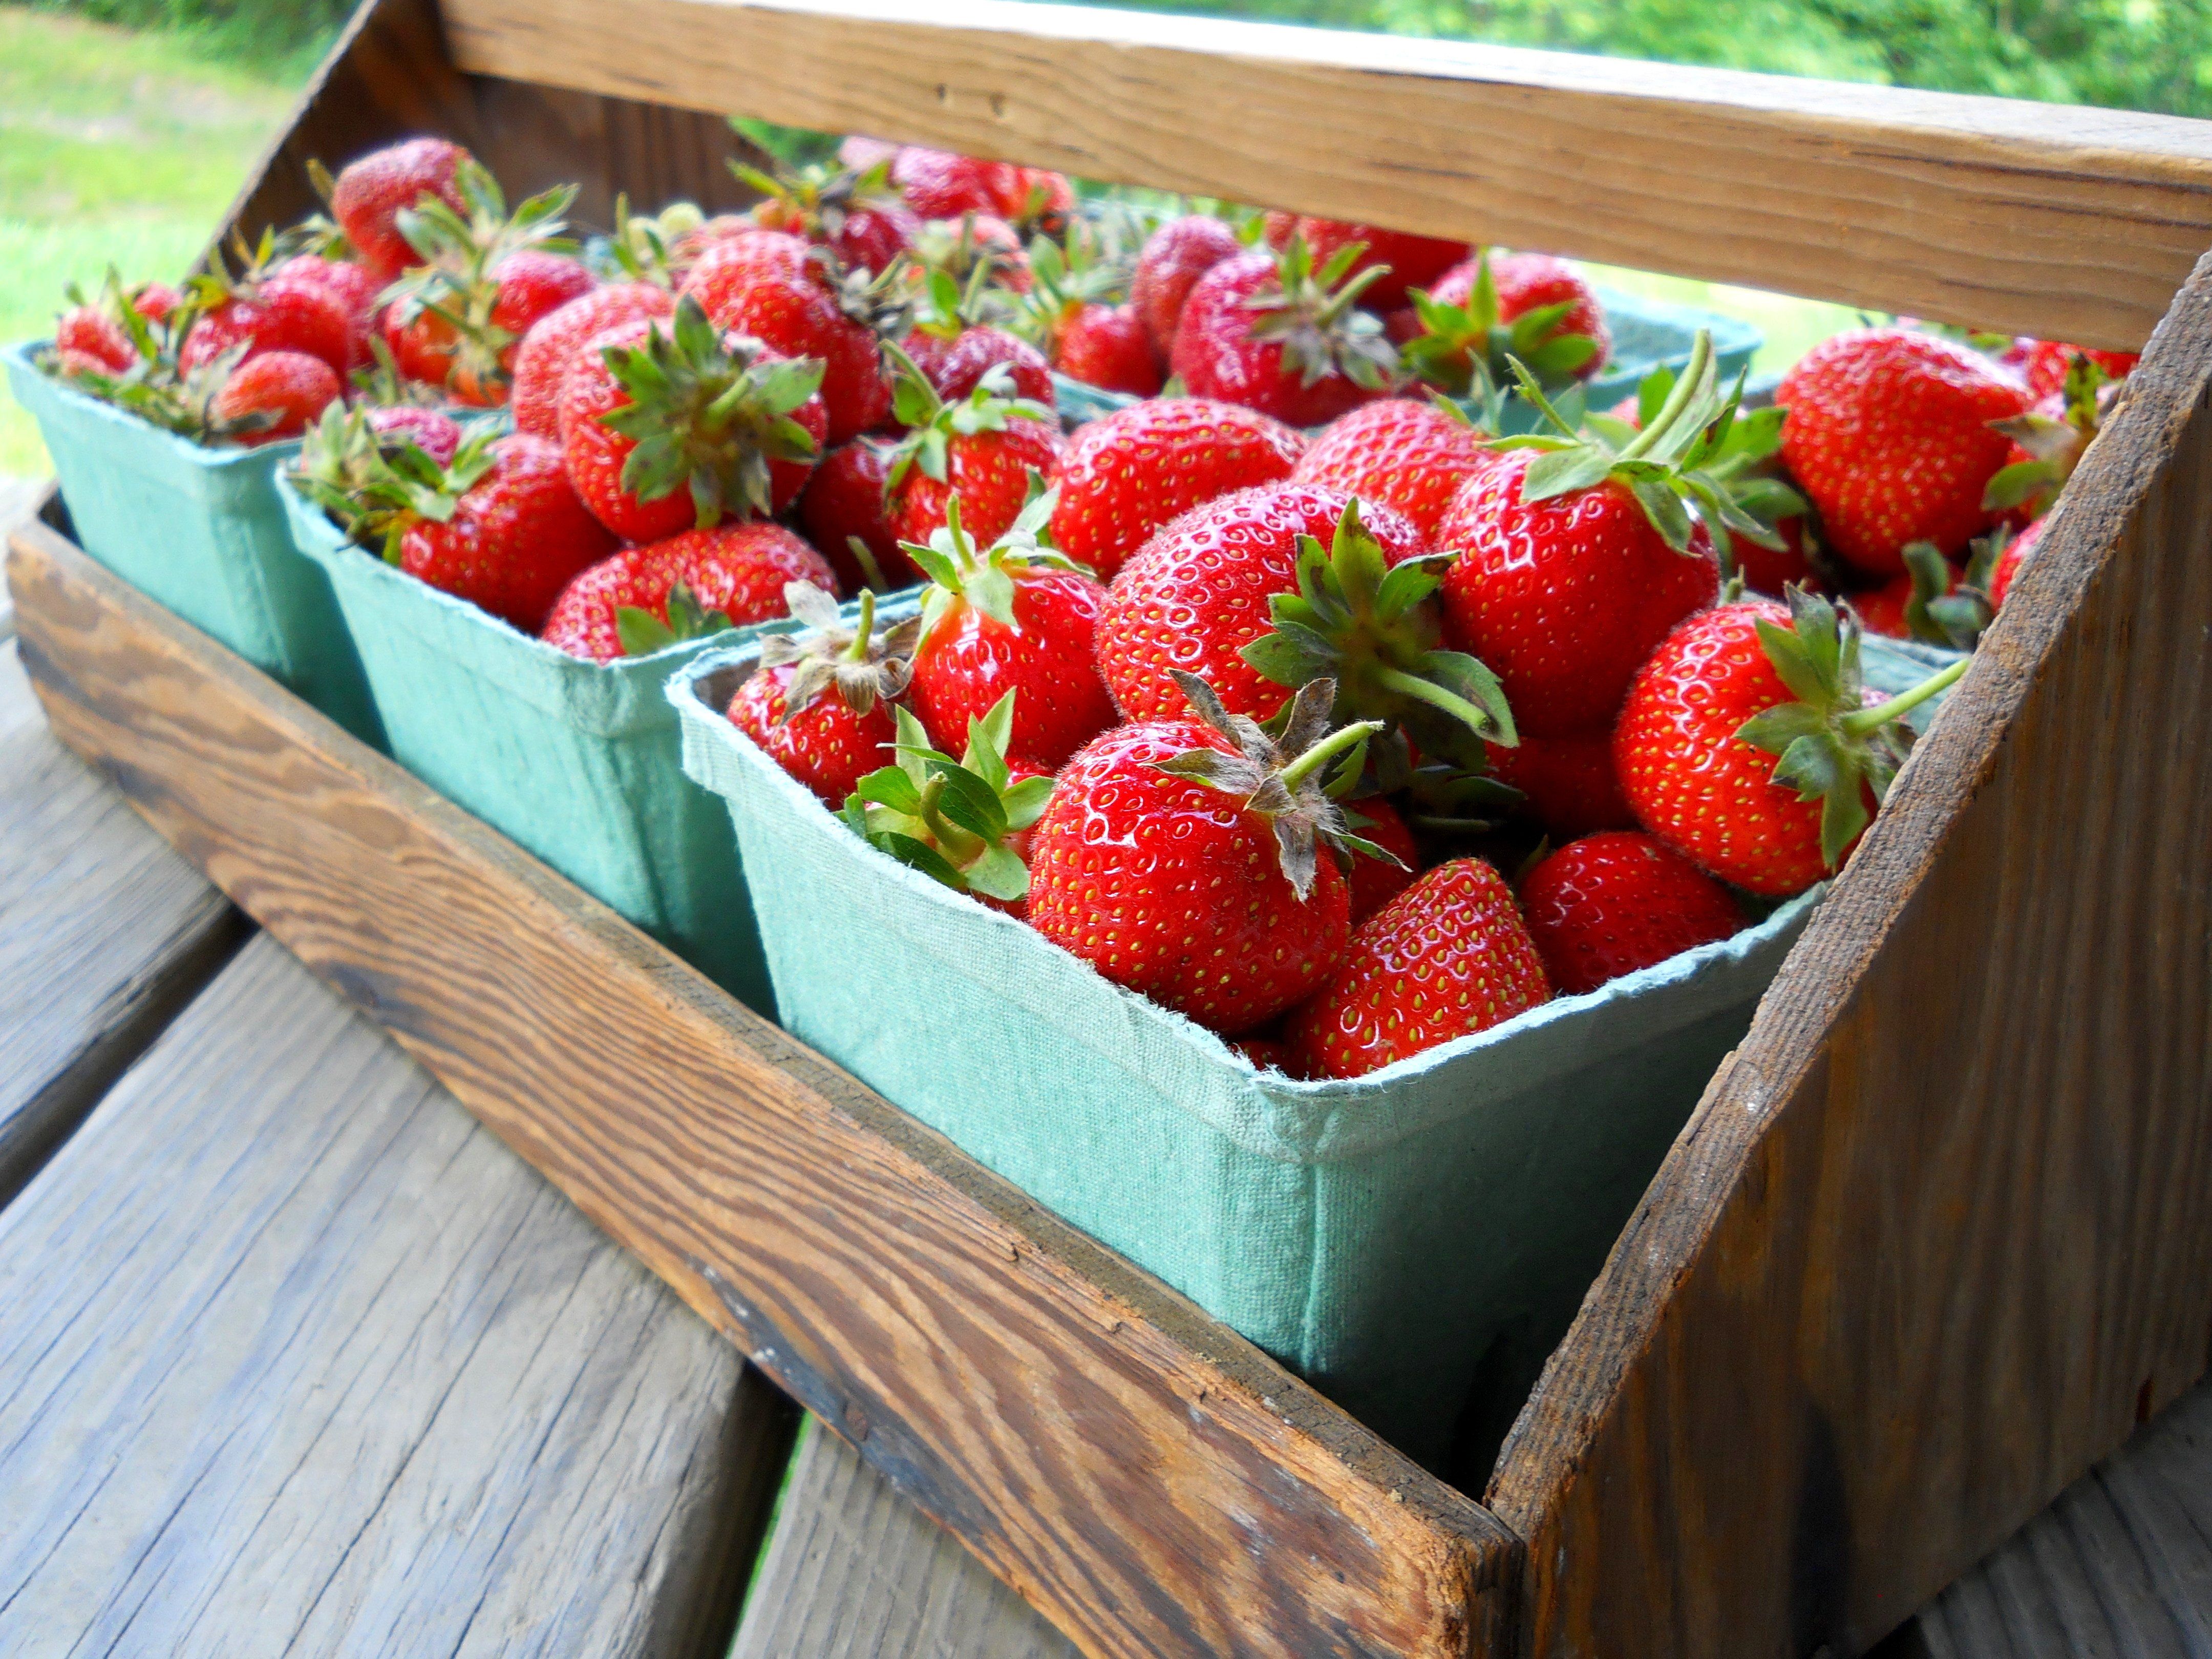 Next Happening: Scant Strawberries This Year